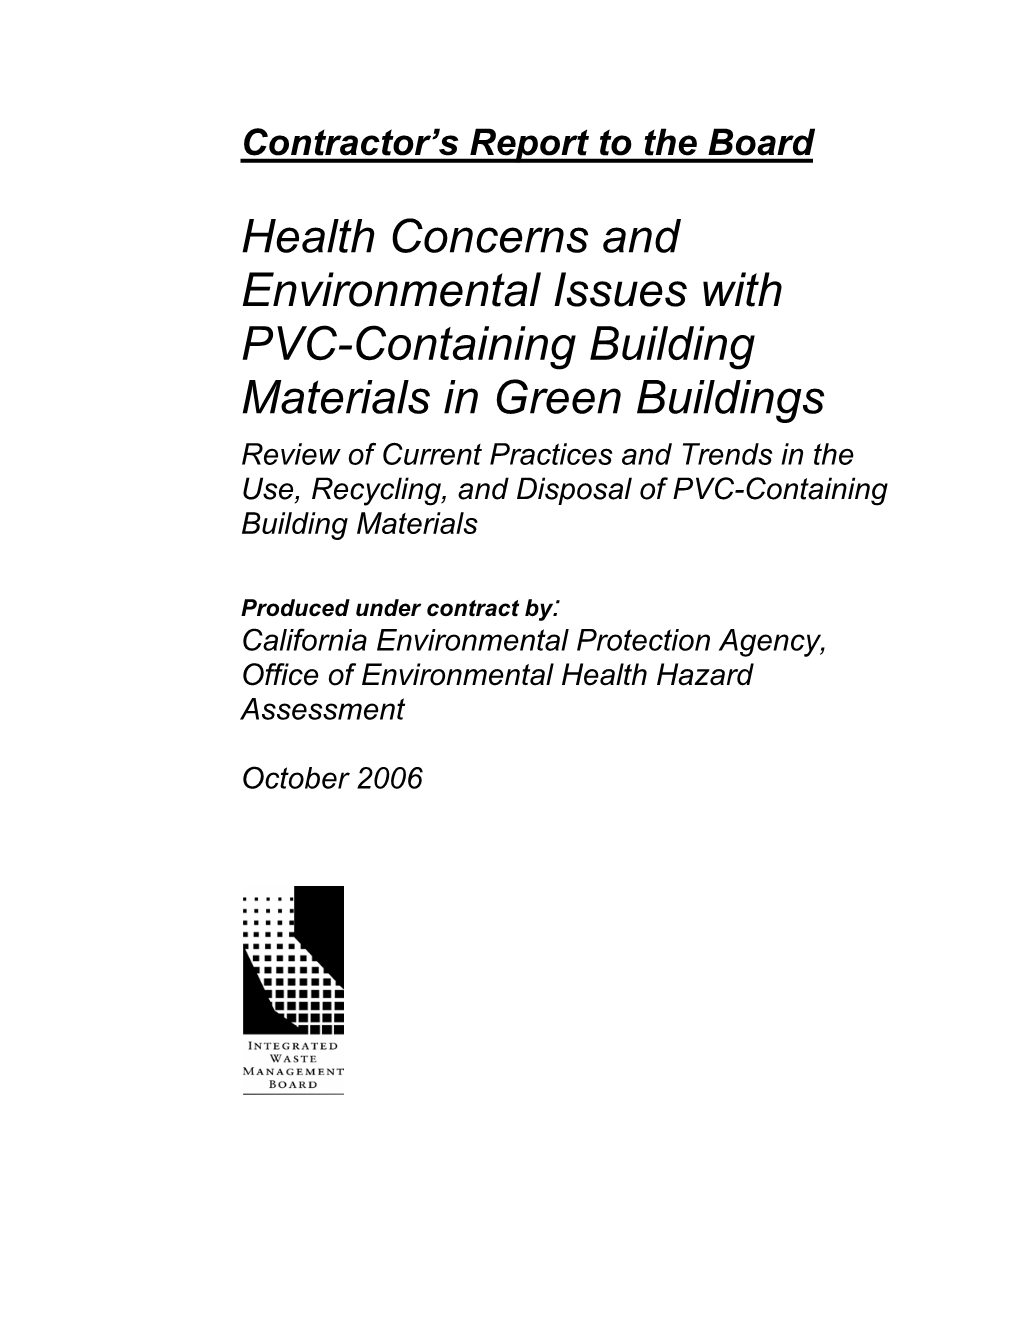 Health Concerns and Environmental Issues with PVC-Containing